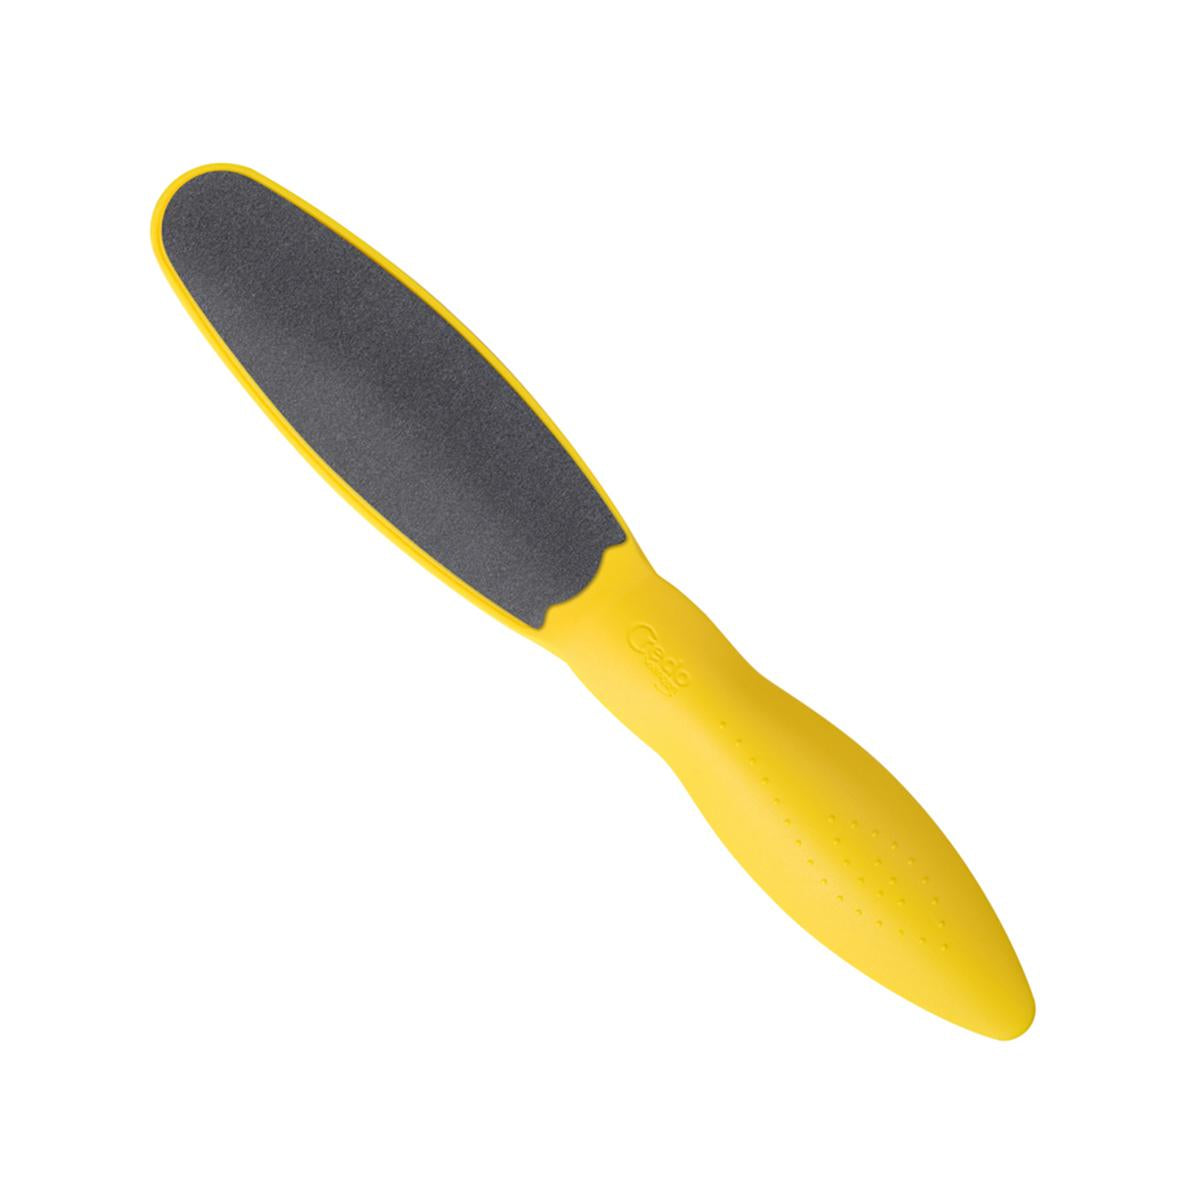 Primary image of Yellow Duosoft Foot Care File